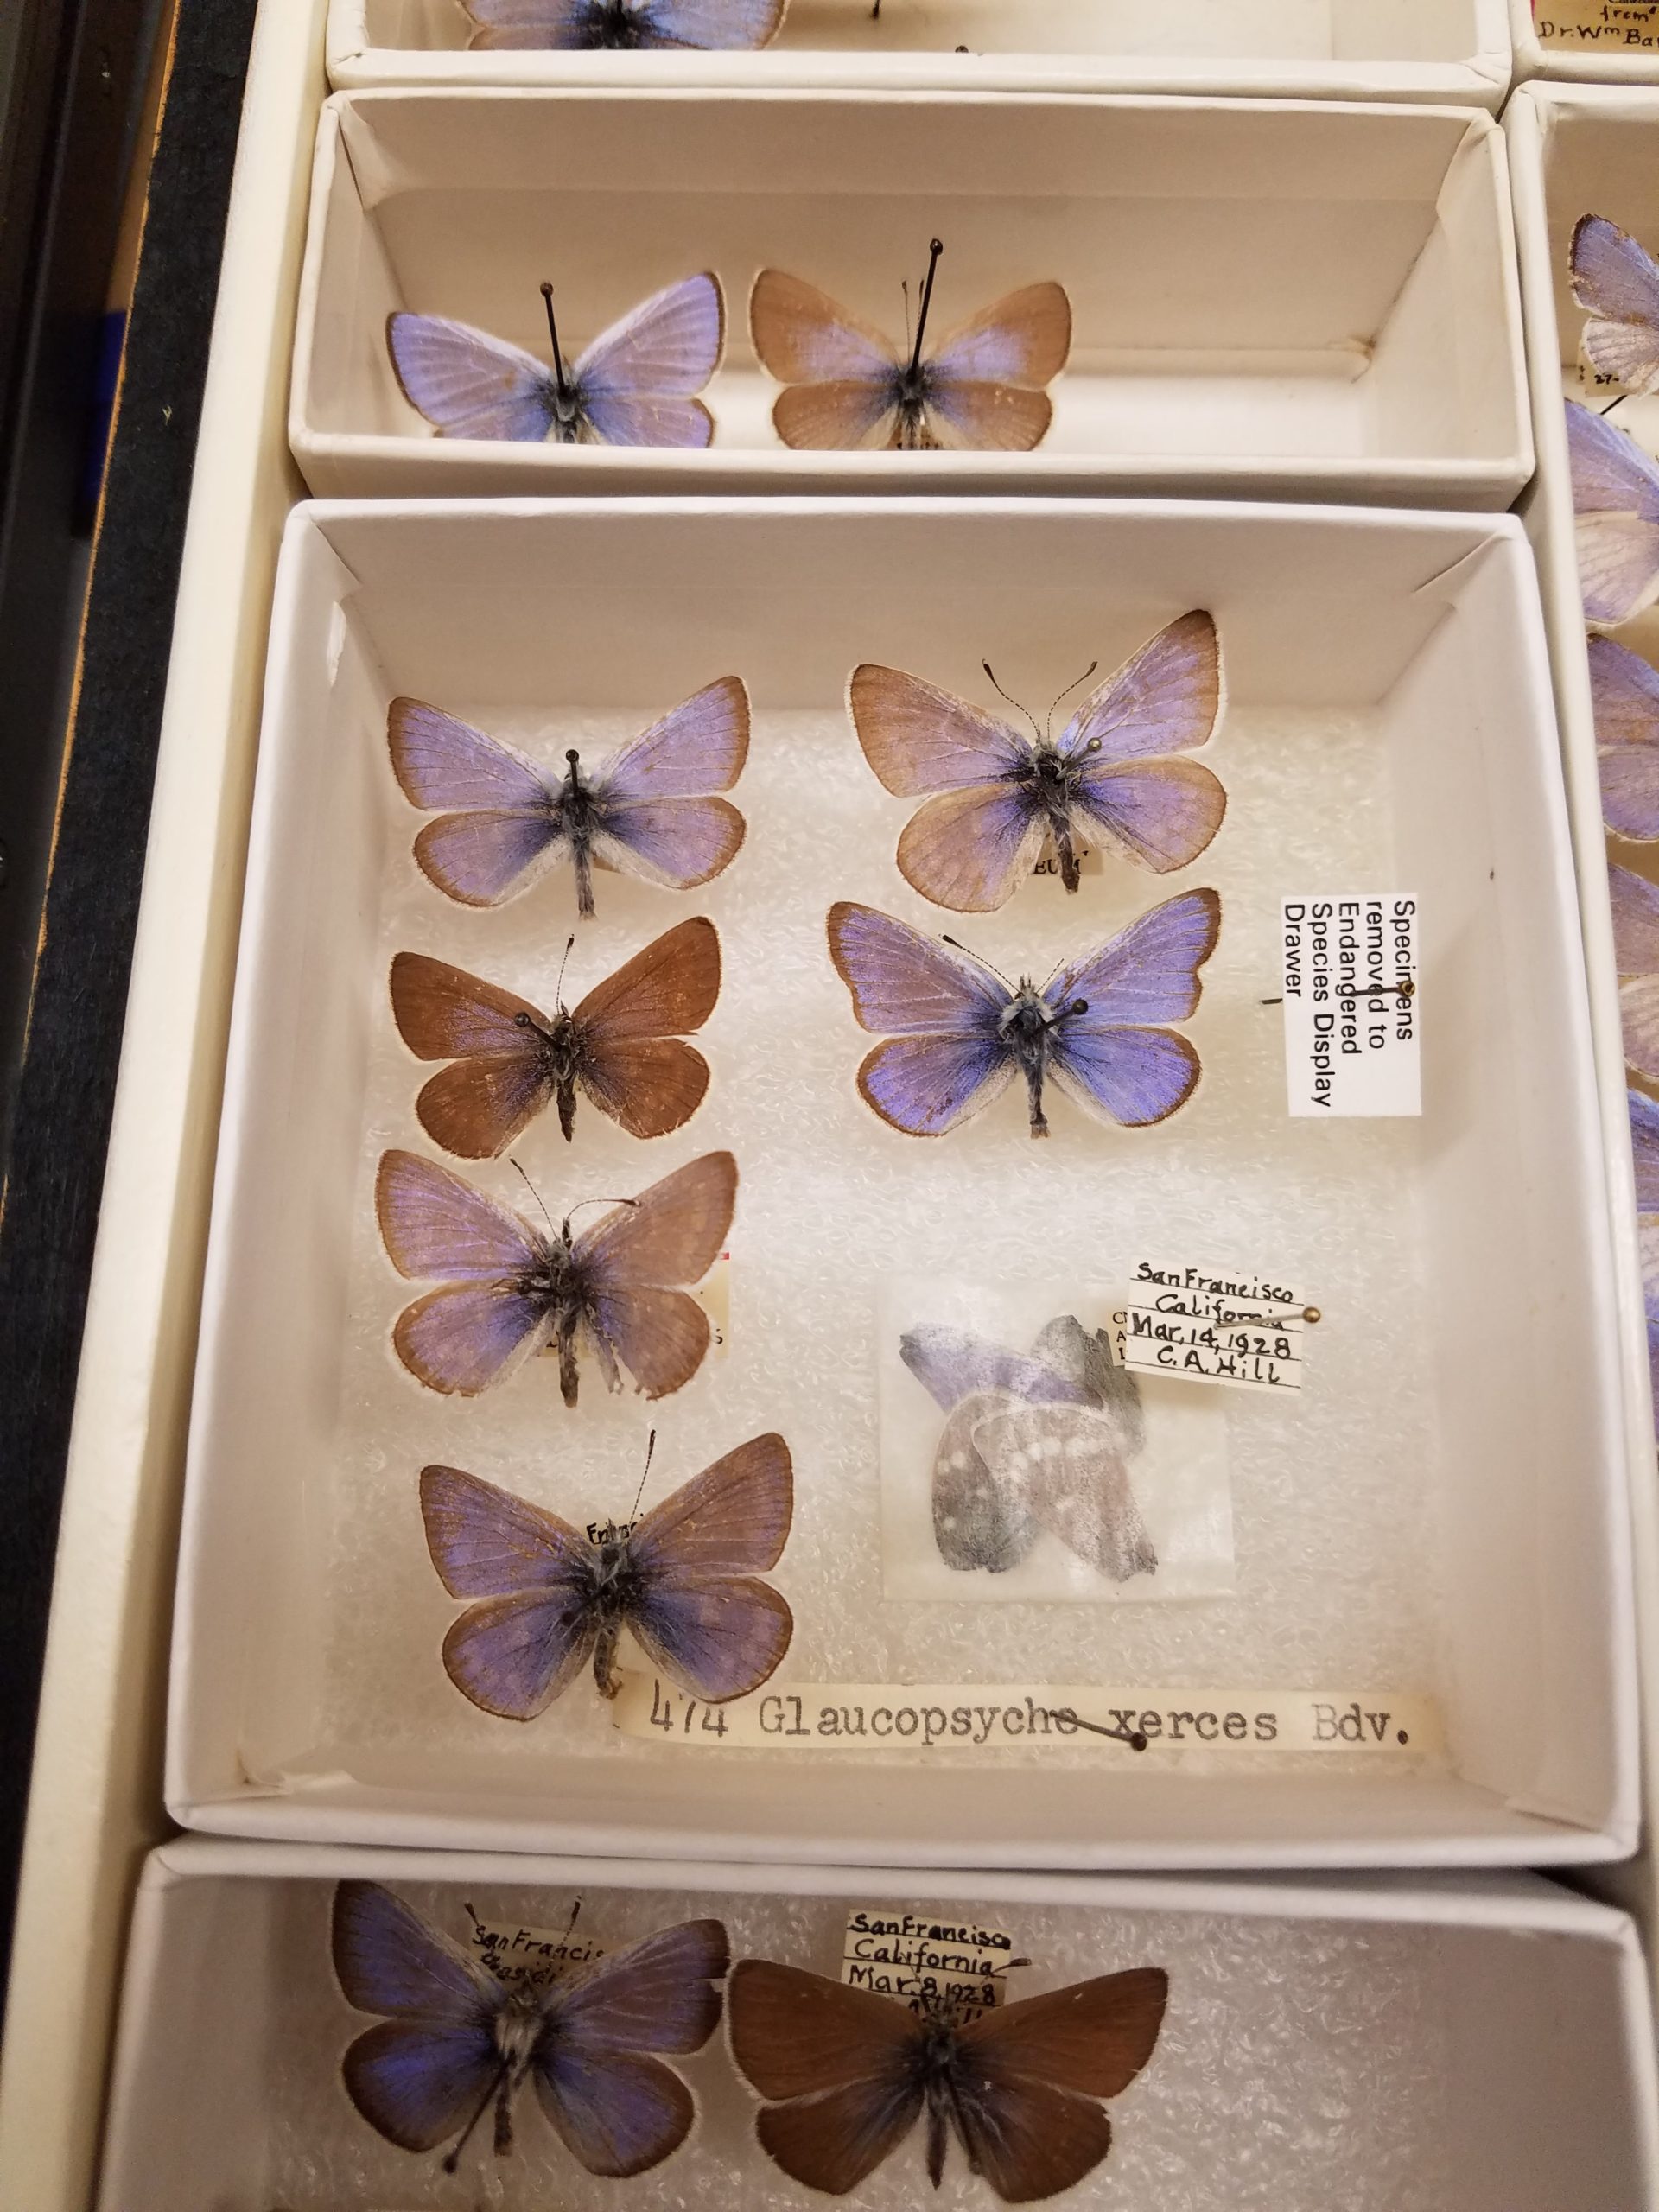 A collection of the extinct Xerces blue butterfly kept preserved at the Field Museum in Chicago. (Photo: Field Museum)